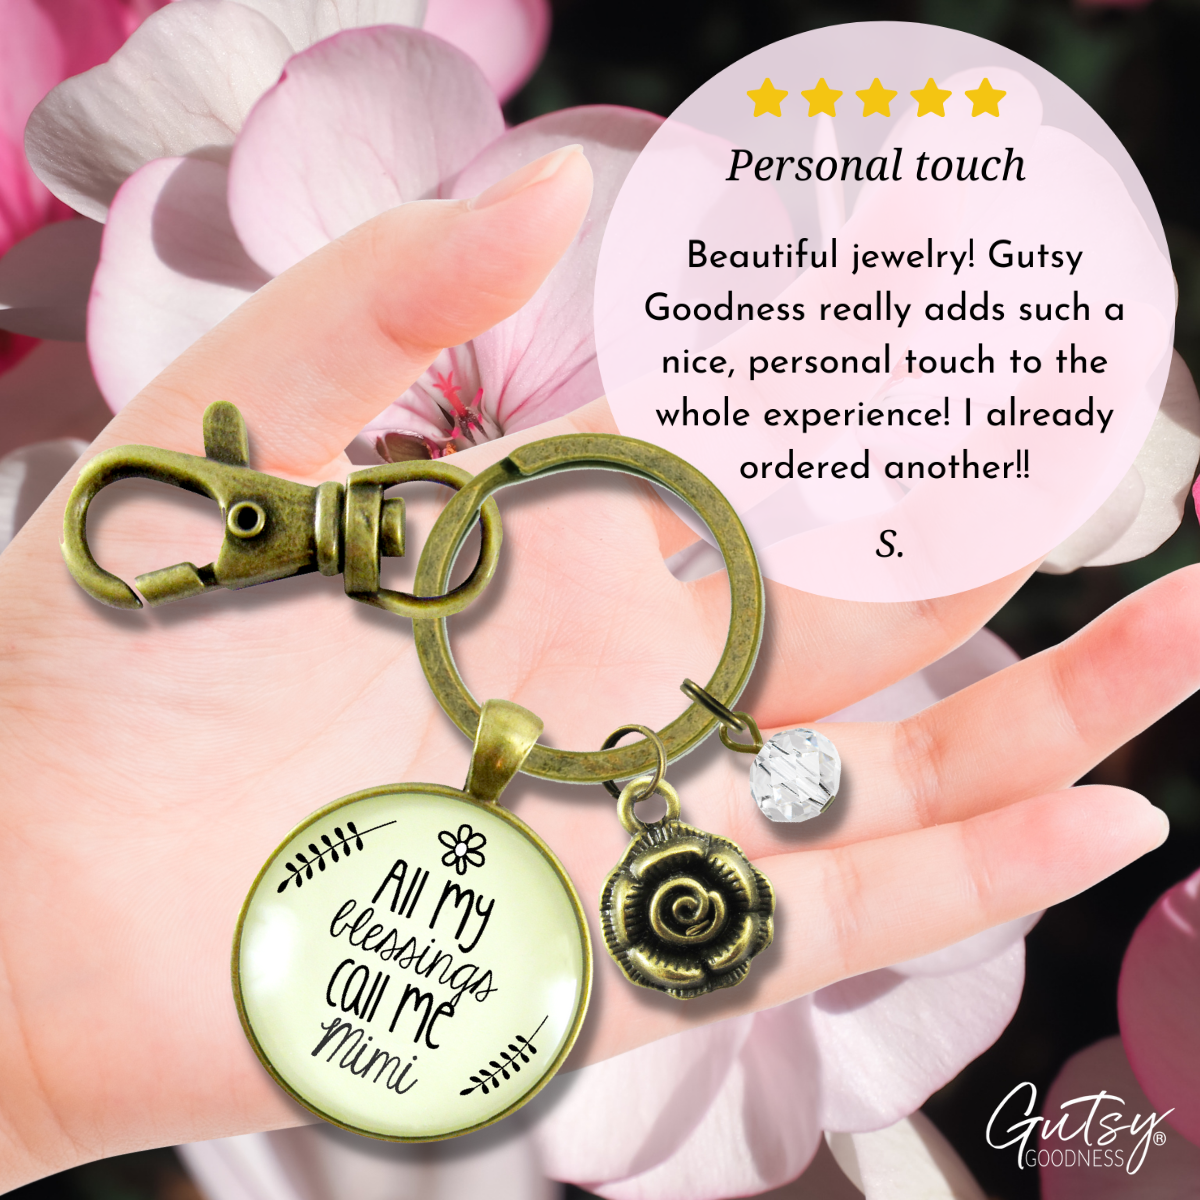 Mimi Keychain All My Blessings Call Me Mimi Gift Quote Charm Jewelry Gift - Gutsy Goodness